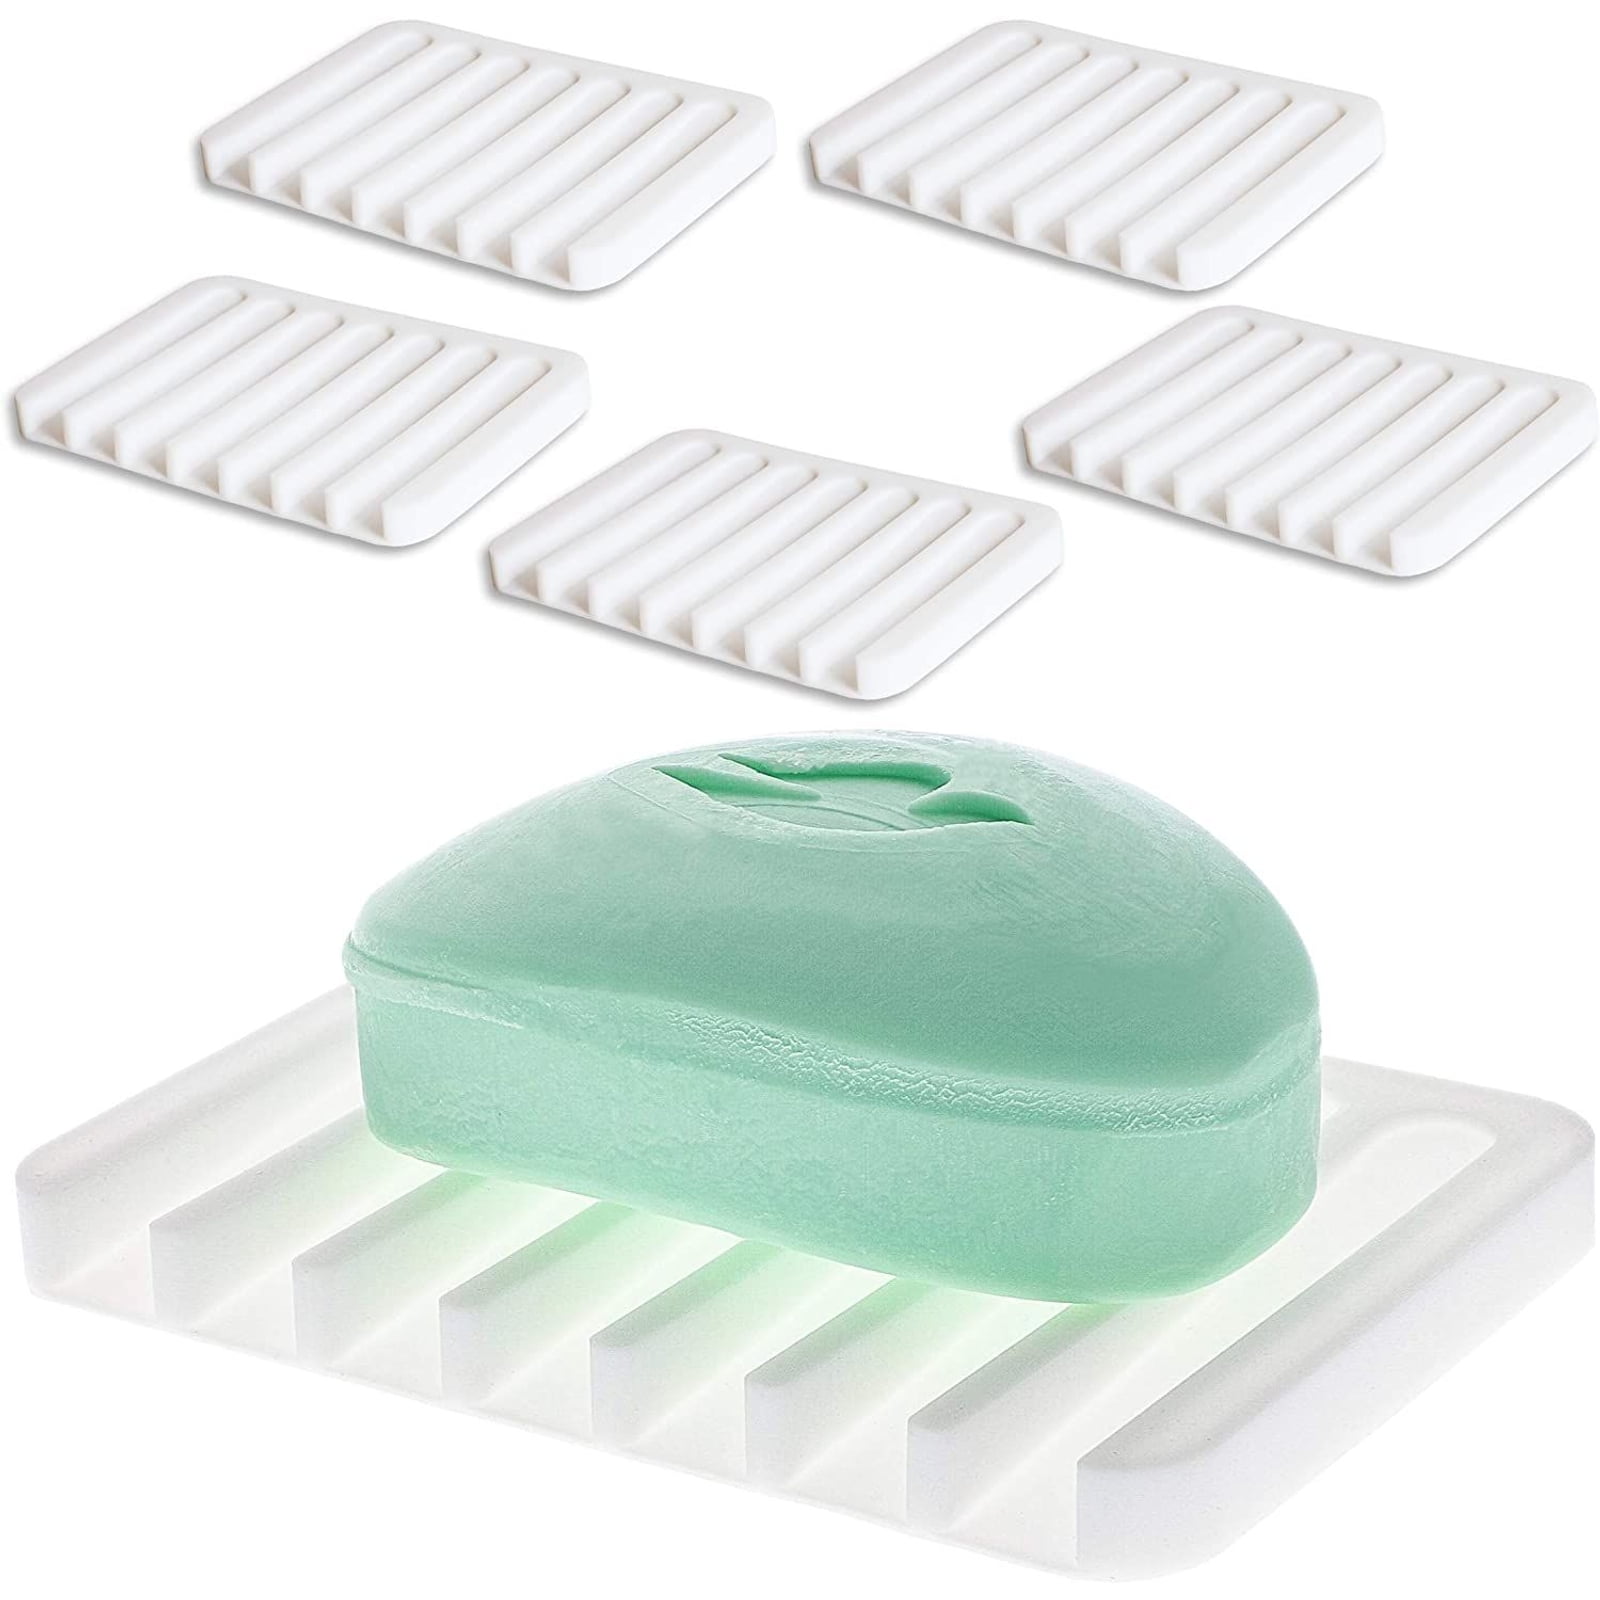 Details about   Clear No Slip Flexible Silicone Home Bathroom Soap Dish Kitchen Dryer Sink Saver